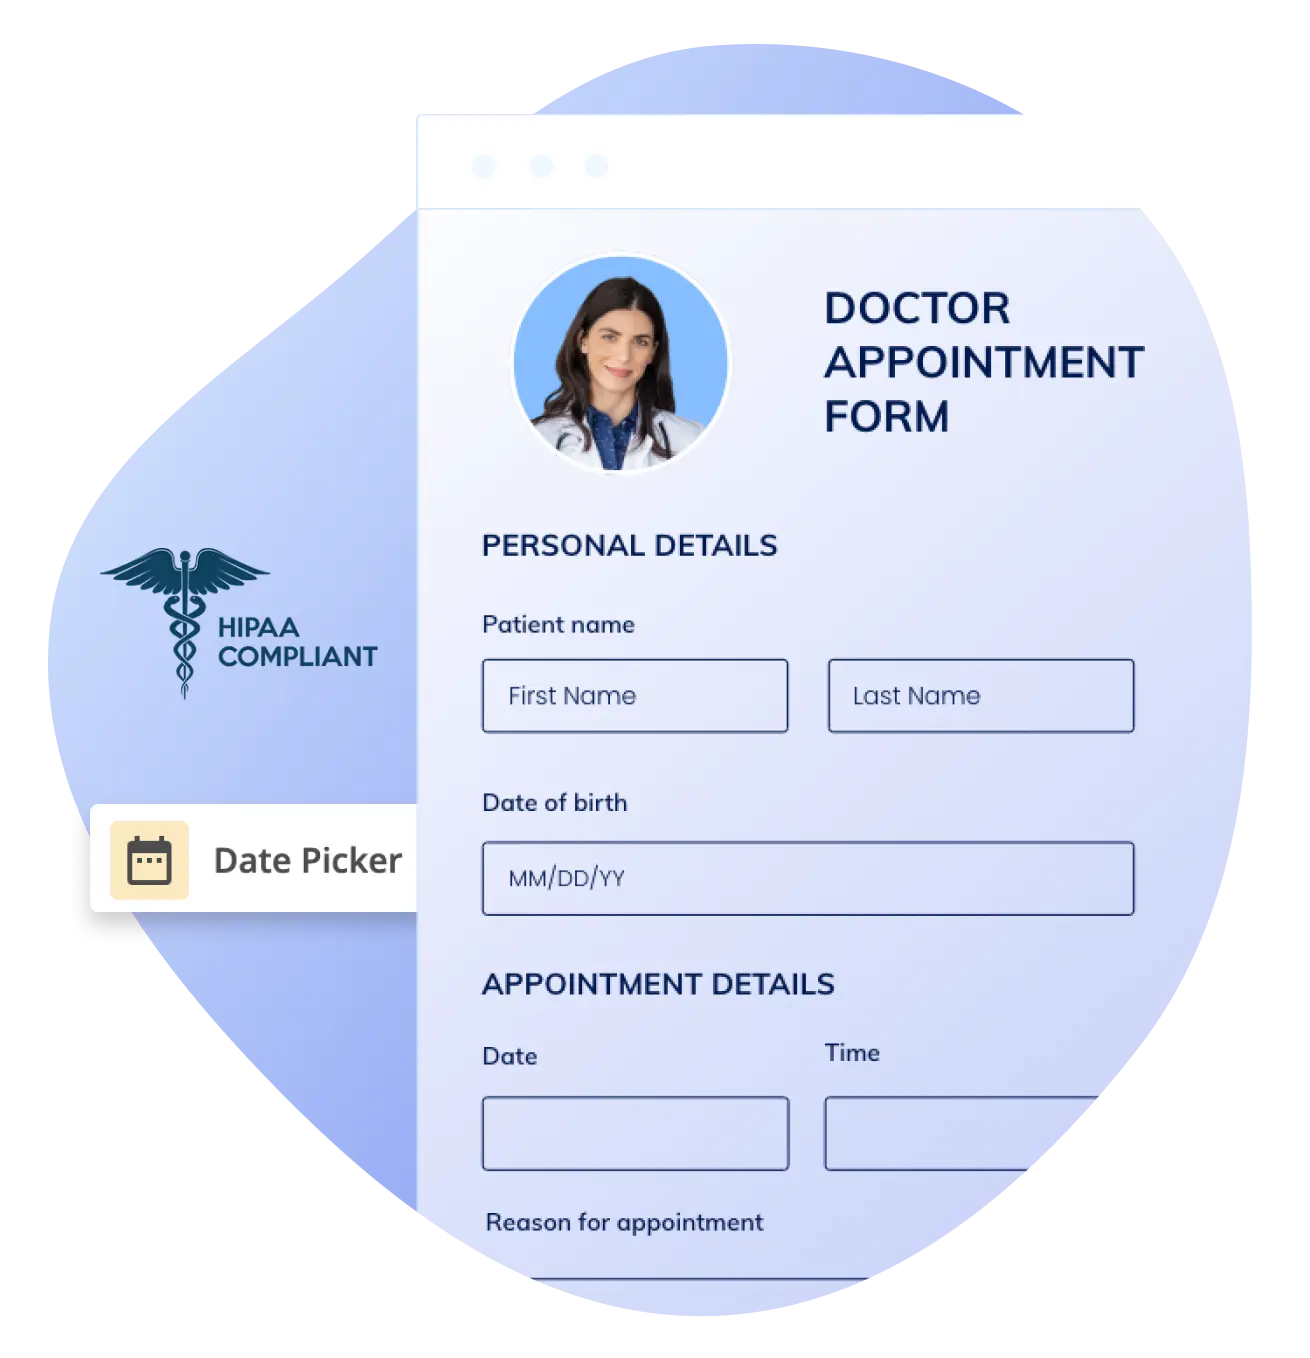 Image showing a doctor appointment form template